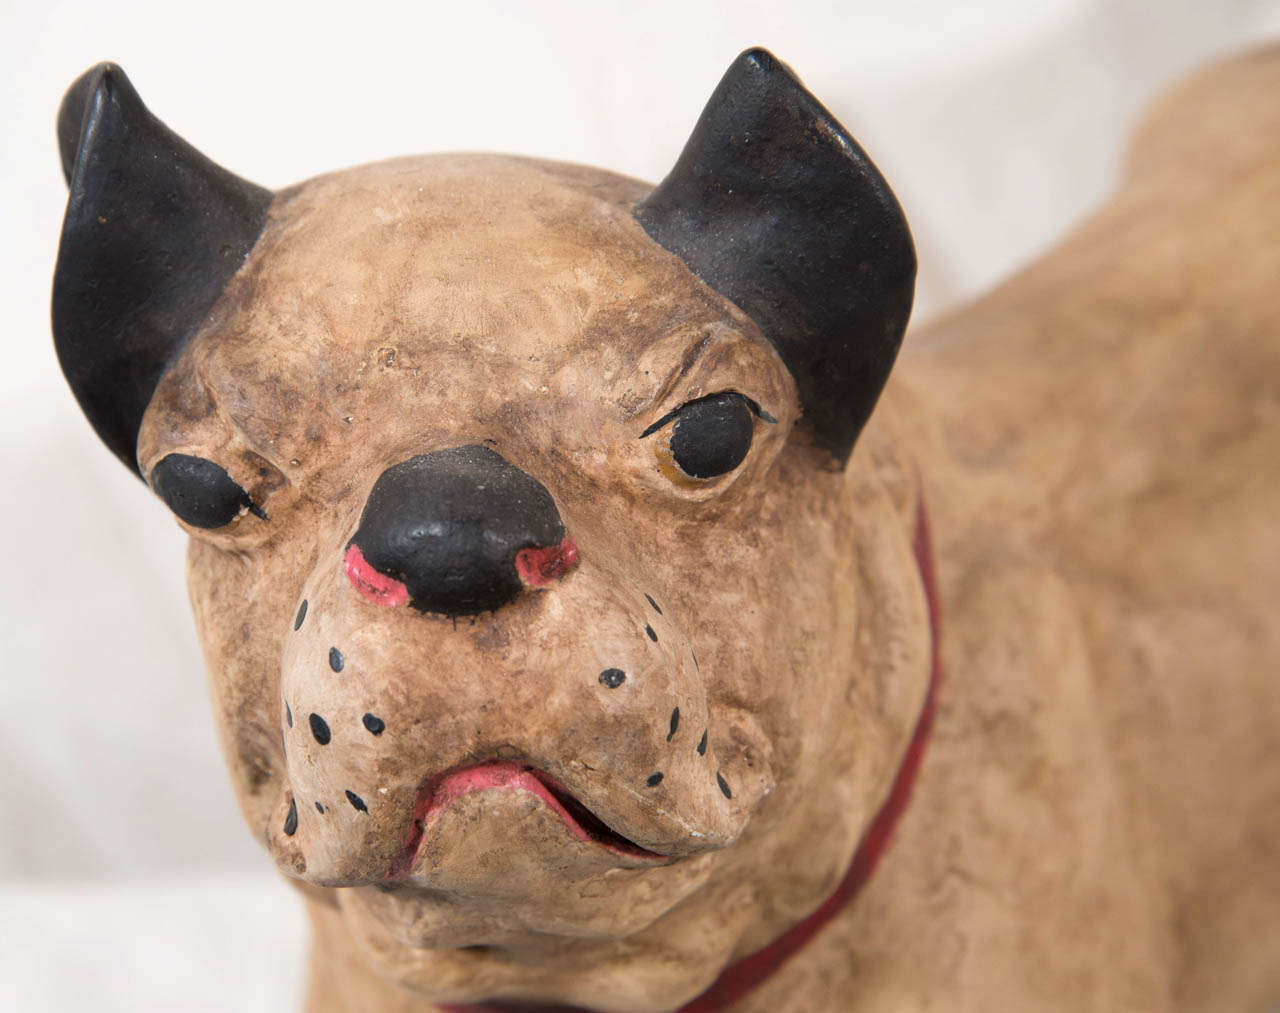 A funny little paper mache figure of a french bulldog with head upturned. Completely hand made with wonderful aging. His surface is hand painted in light and medium brown, his ears, eyes, and snout painted black, his collar and mouth painted red. He